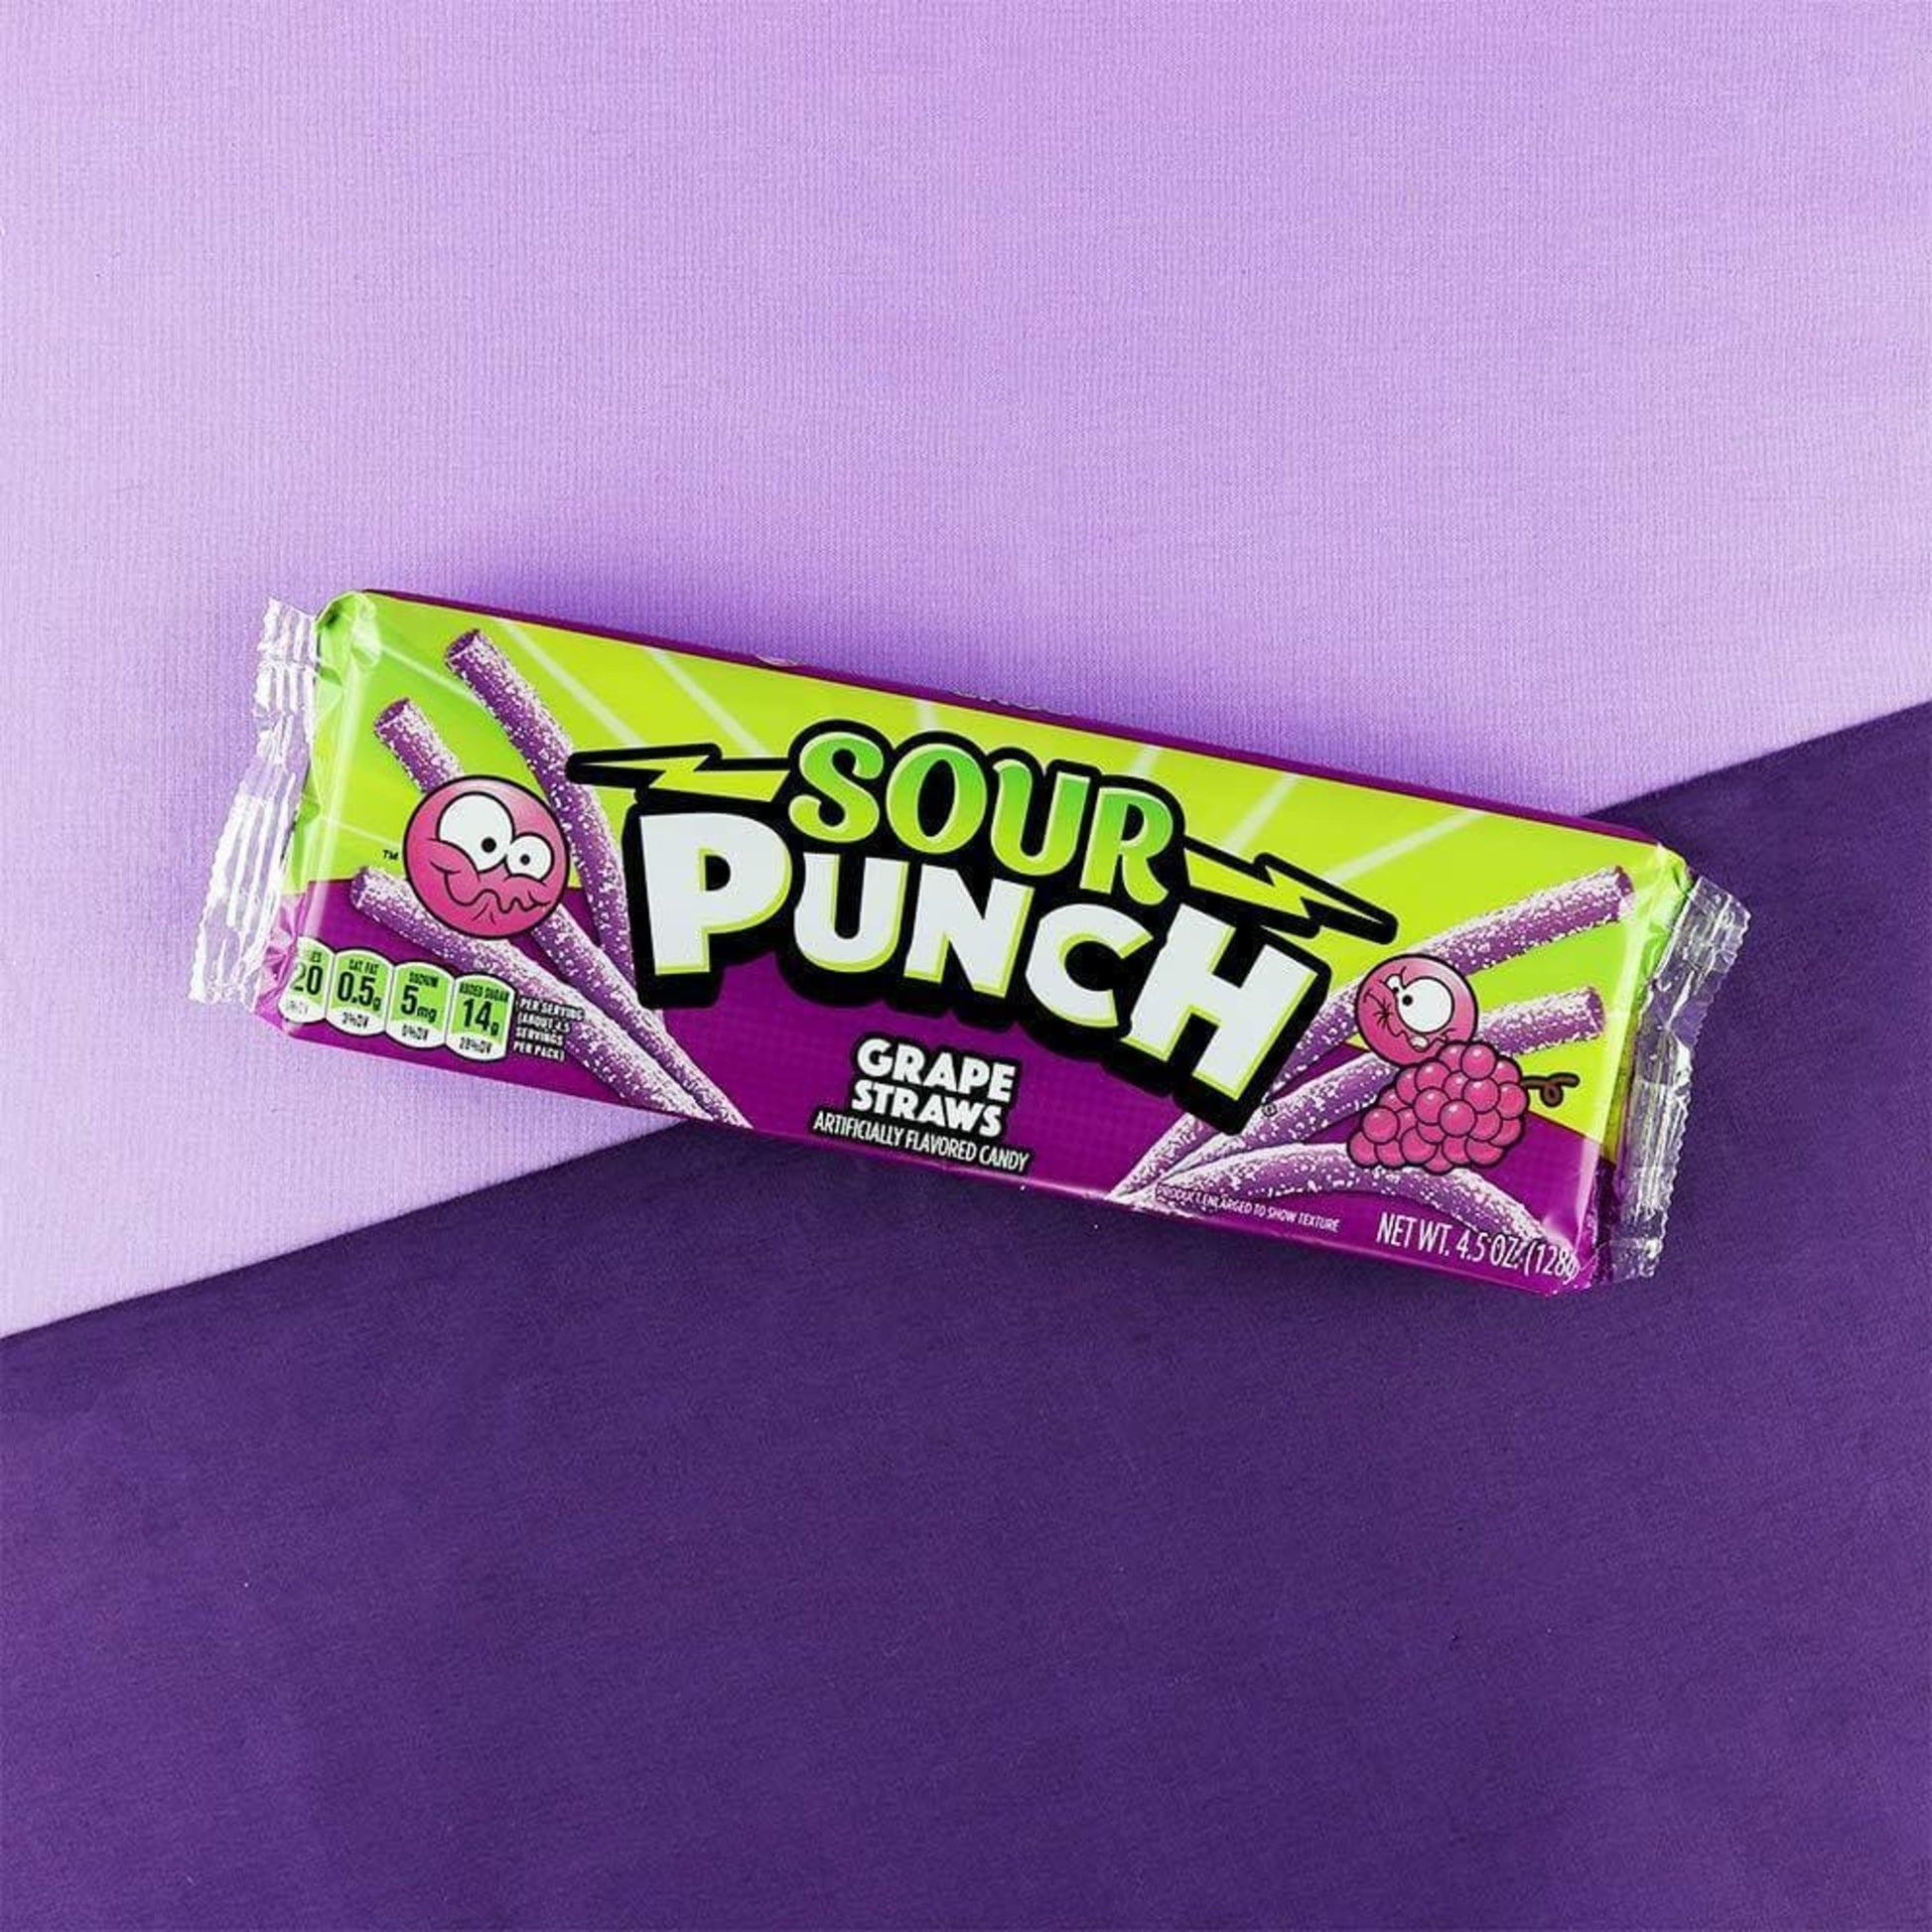 Sour Punch Grape Candy Straws on Two Shades of Purple Background - Sour Punch Grape Straws